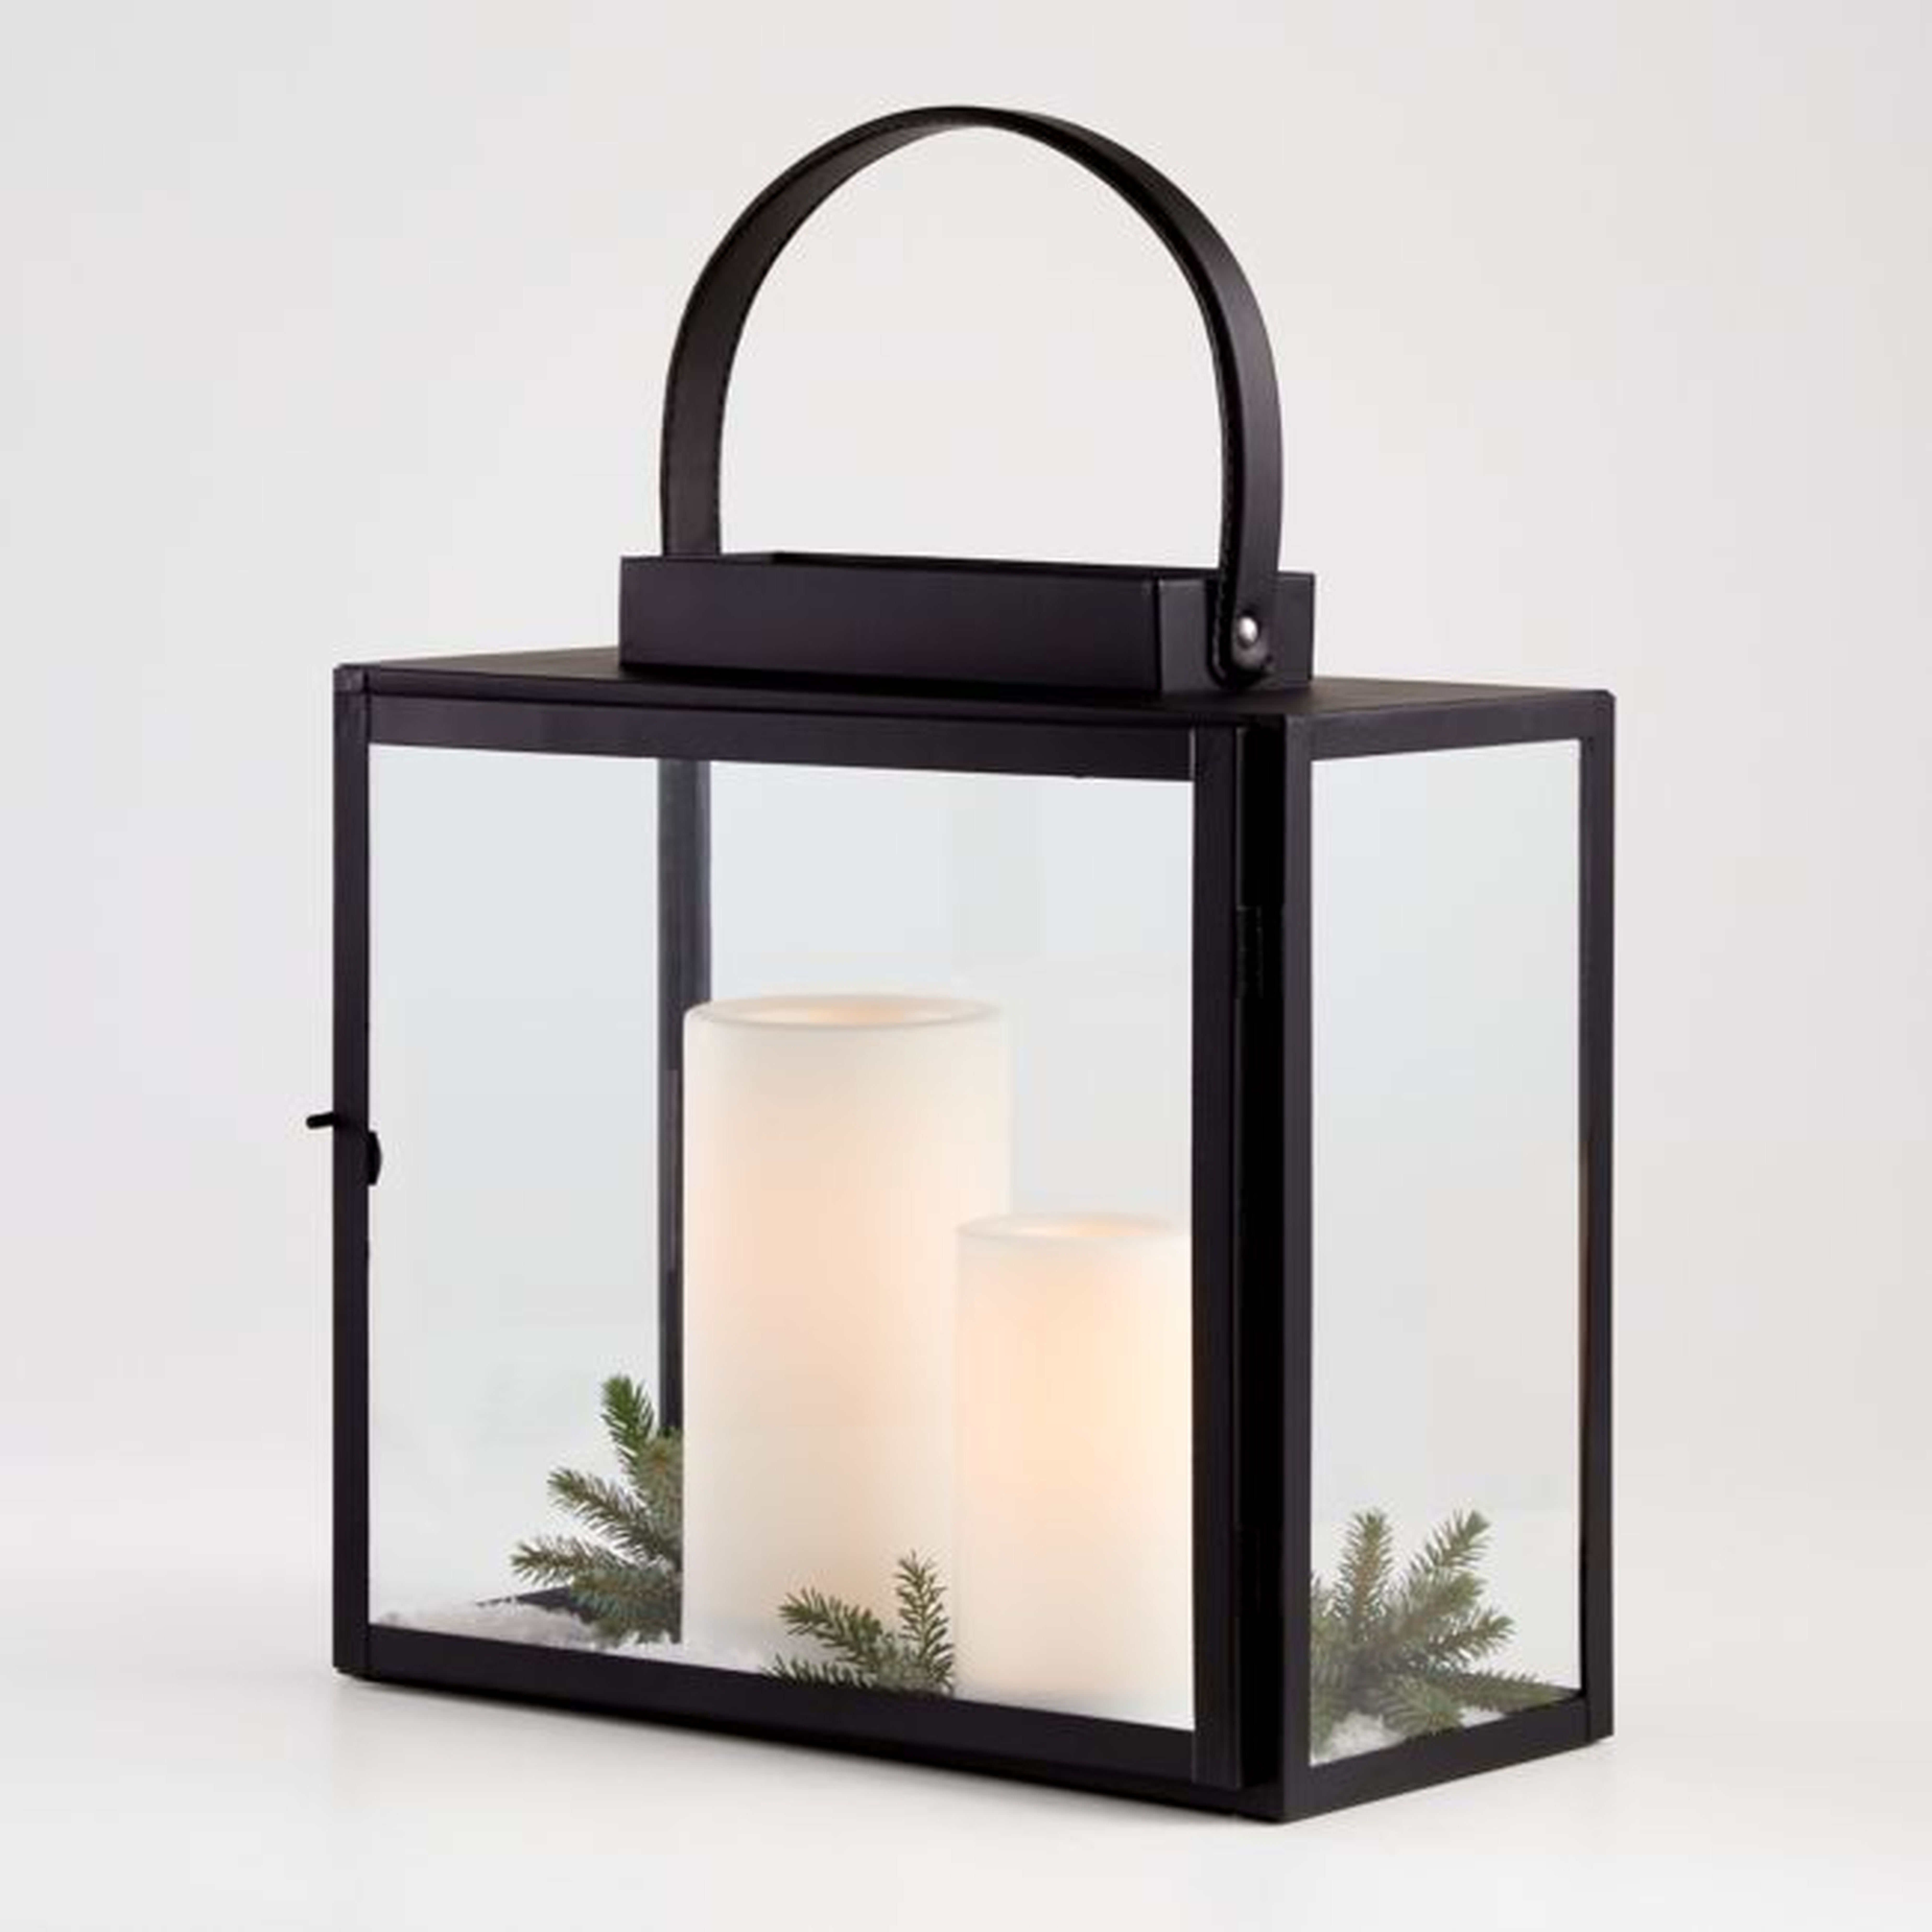 Sonnet Hurricane Lantern with Handle - Crate and Barrel